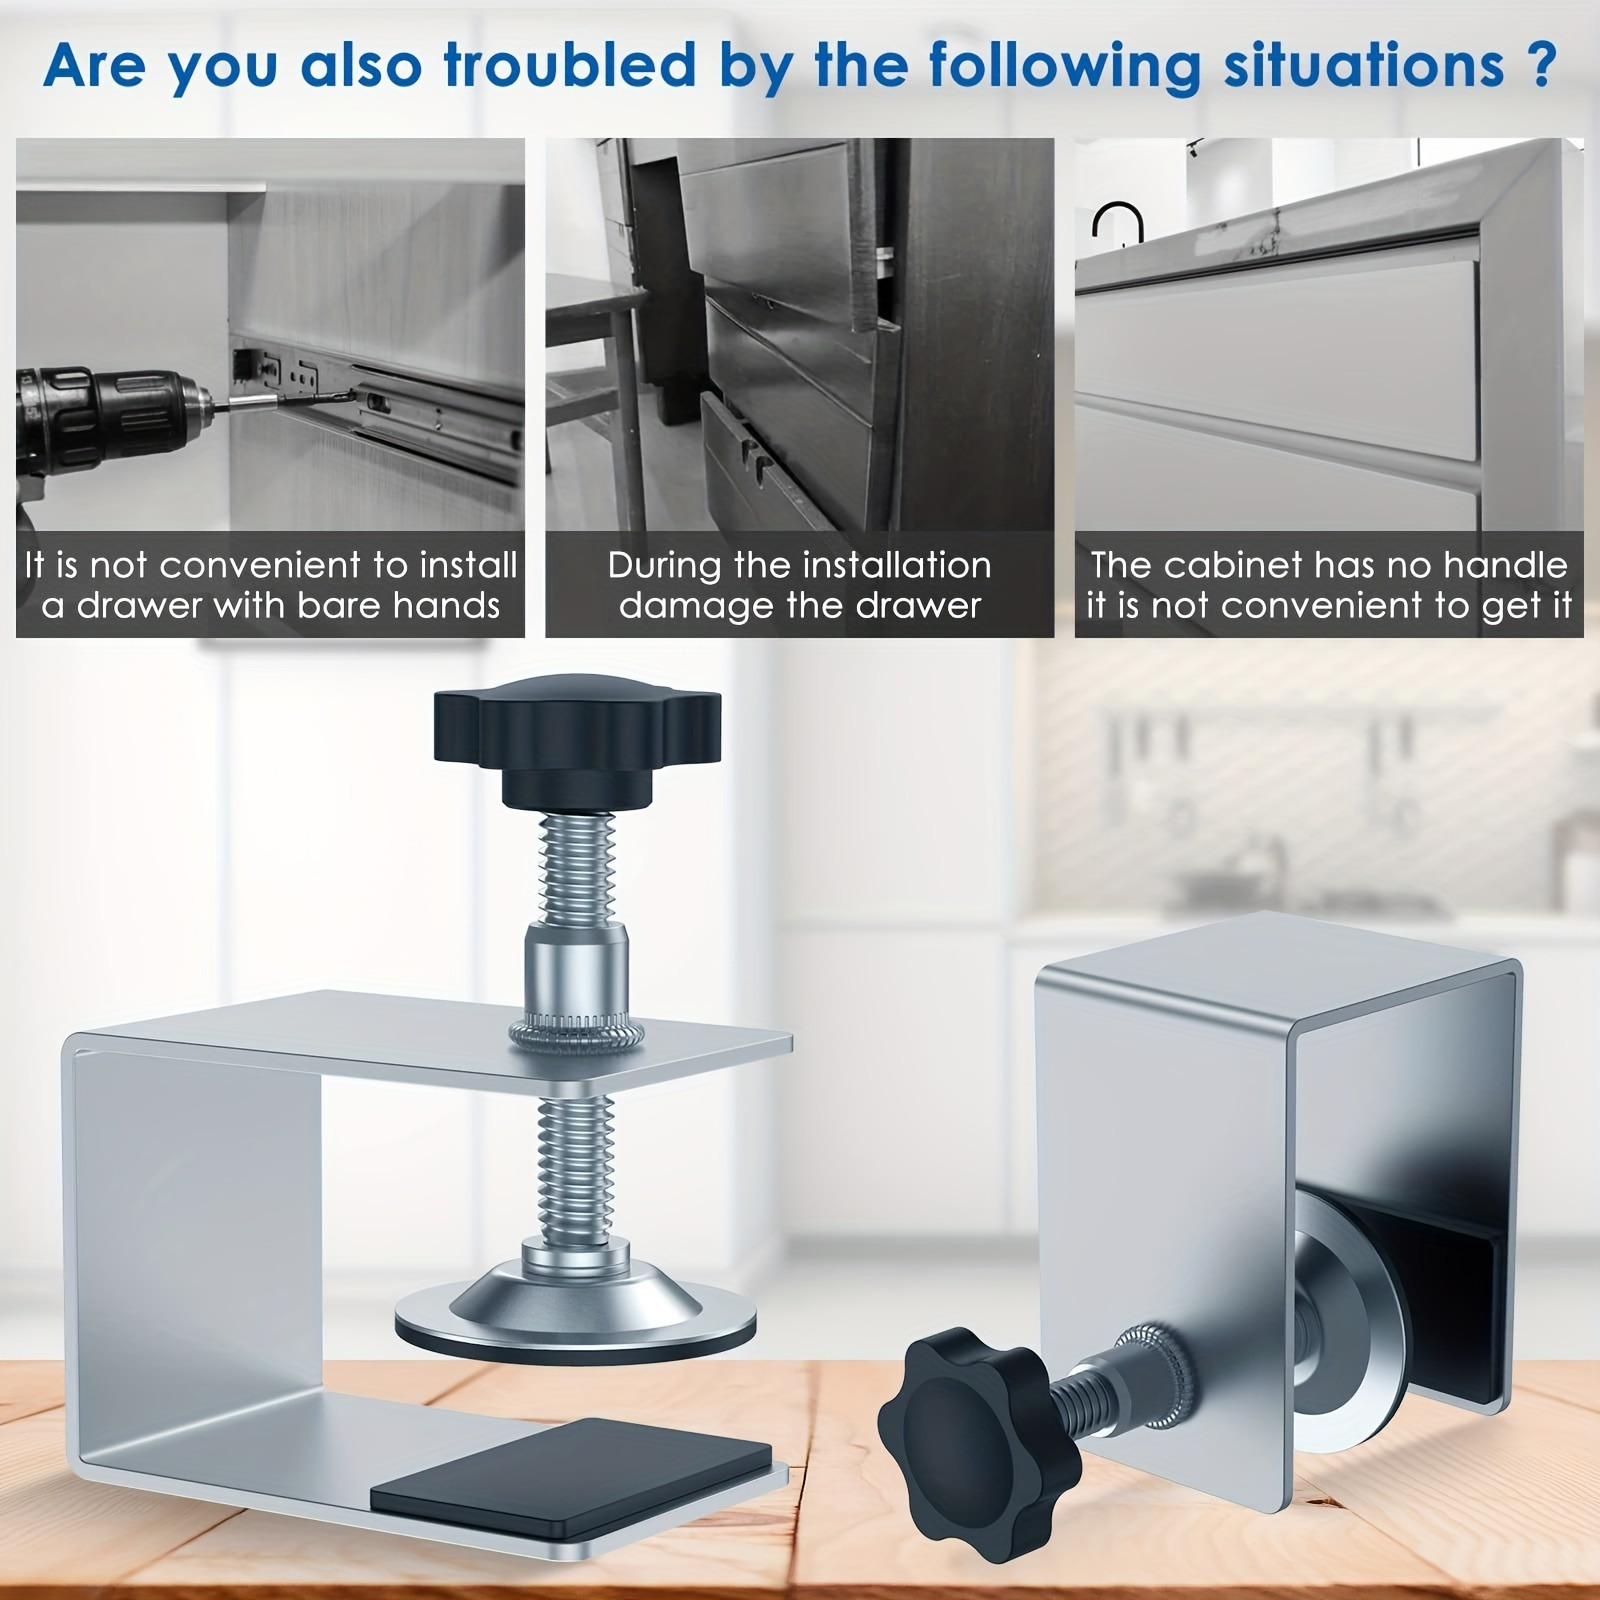 

2pcs/set, Cabinet Drawer Installation Clamps With Hardware Jig, Easy Setup & Stable Clamping, For Home And Workshop Use